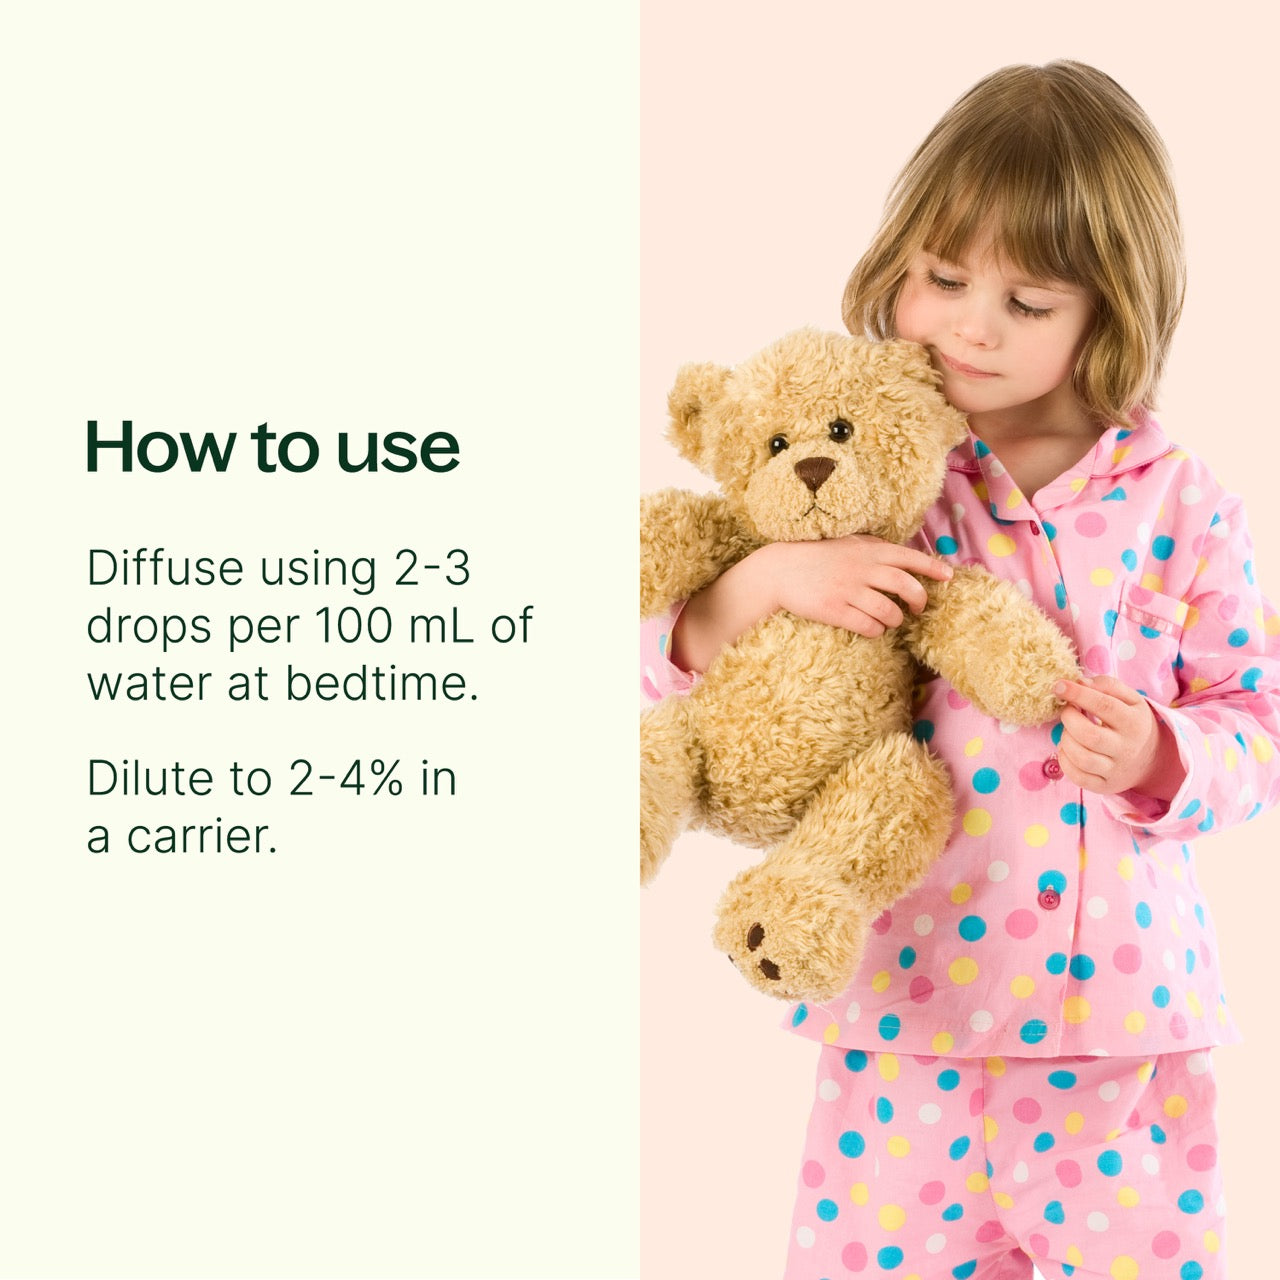 Nighty Night KidSafe Essential Oil How to Use: Diffuser using 2-3 drops per 100 mL of water at bedtime. Dilute to 2-4% in a carrier.